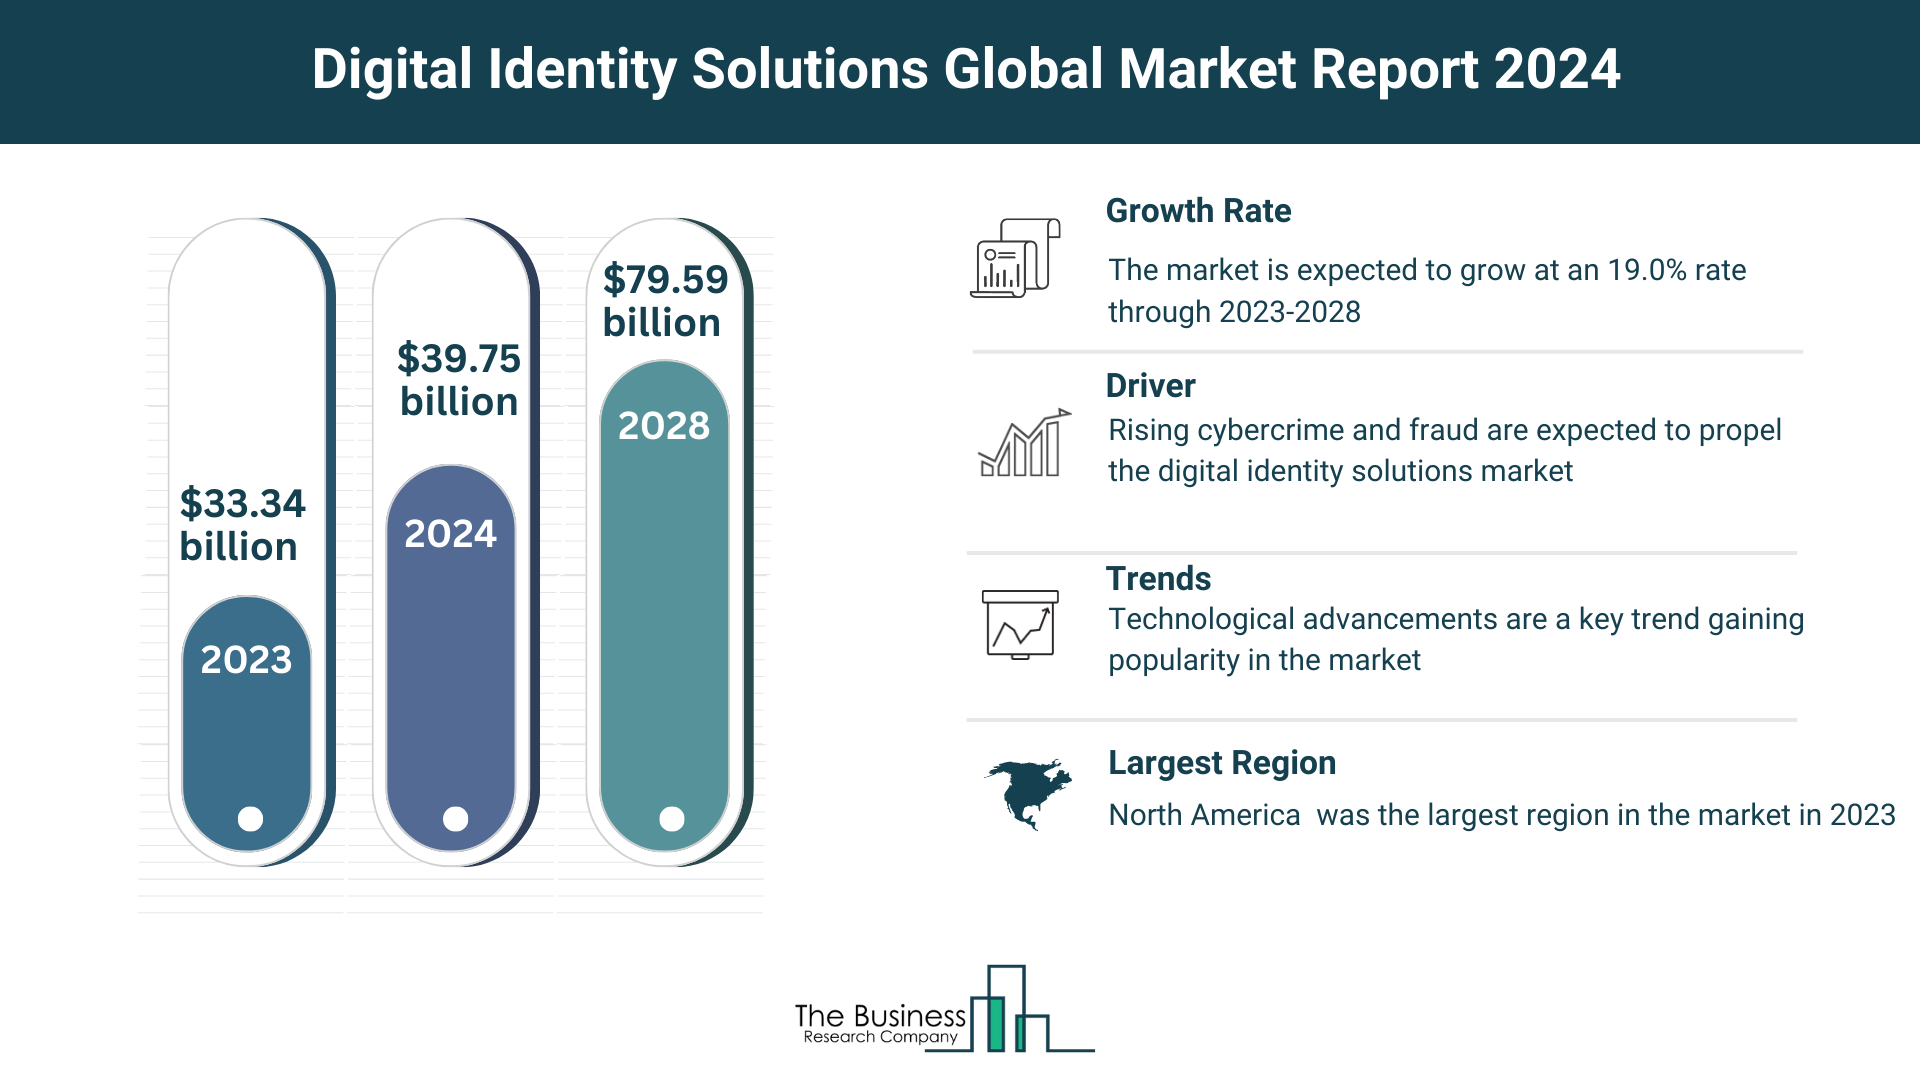 How are Digital Identity solutions meeting the increasing need for market information and sustainability of key trends?